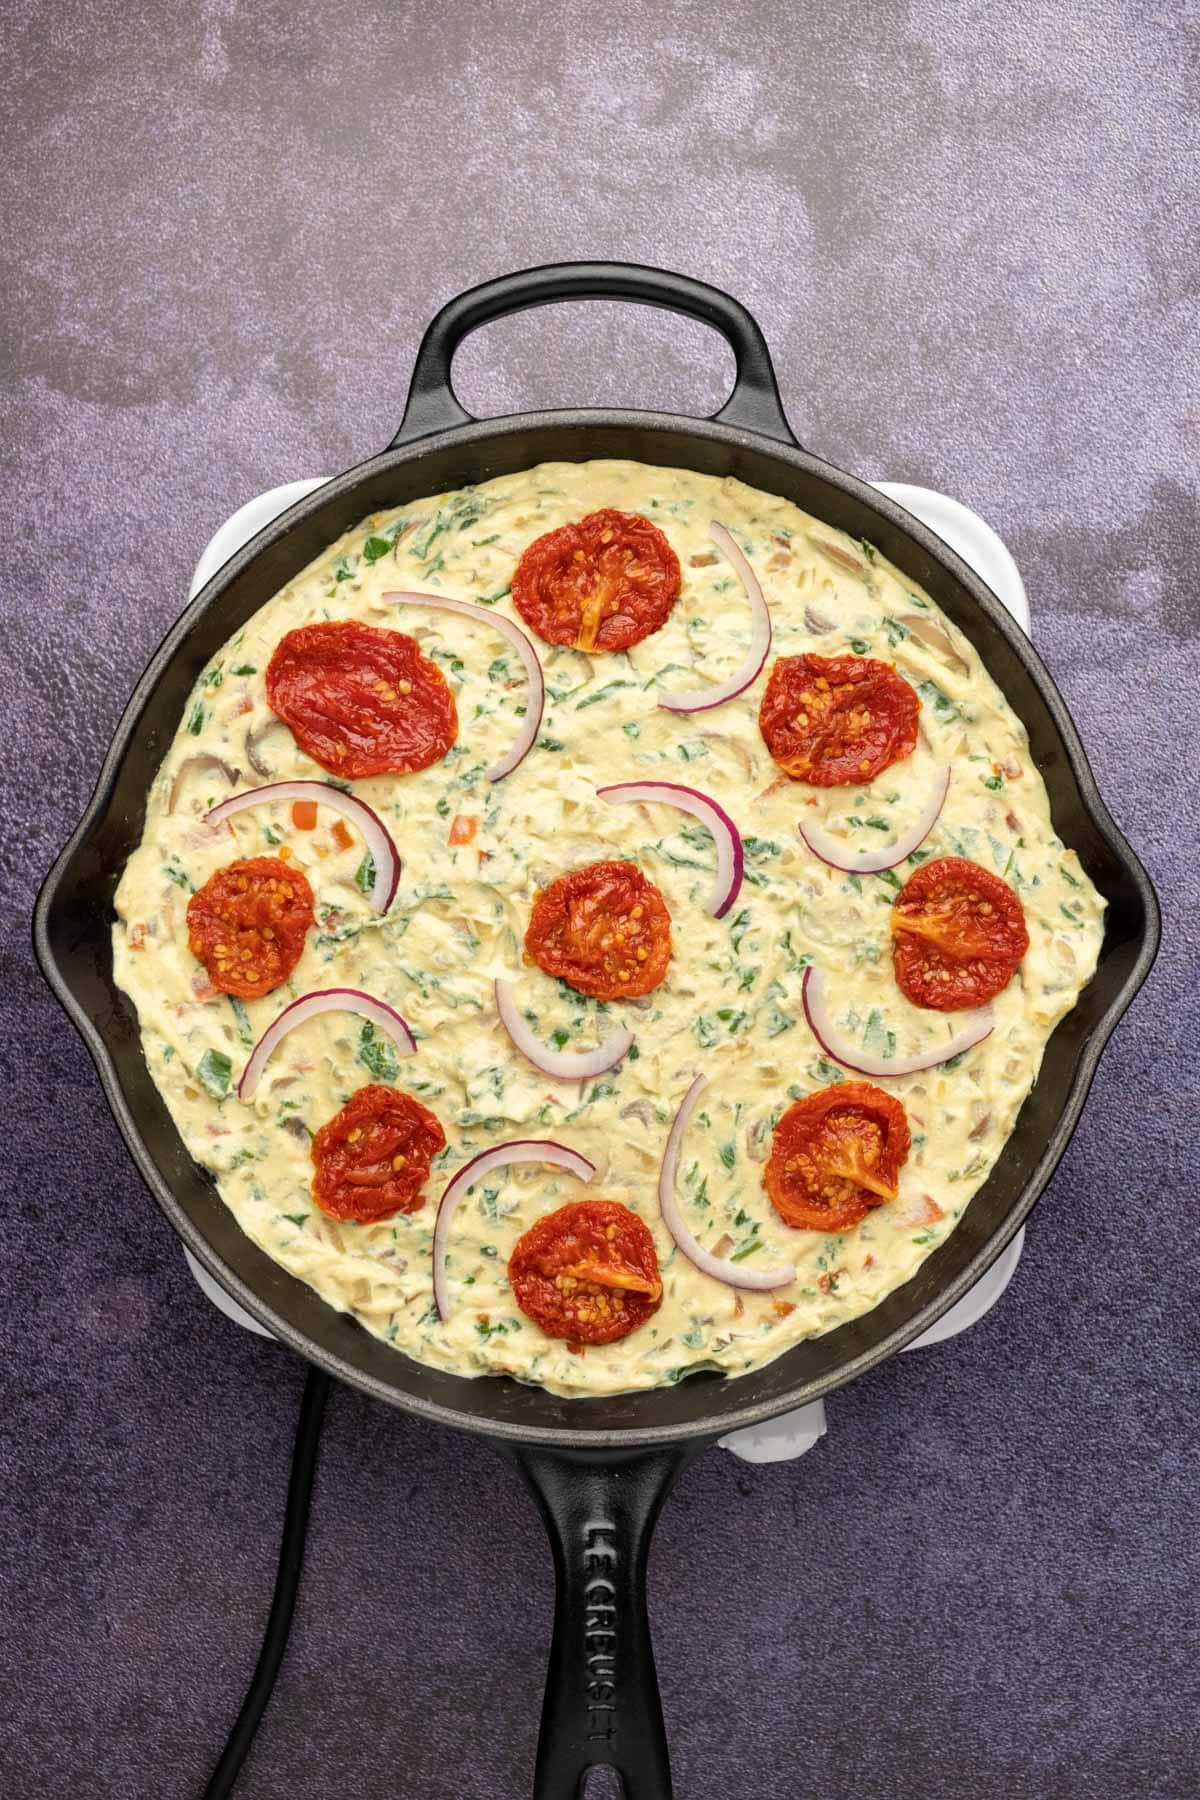 Vegan frittata in a cast iron skillet ready to bake.